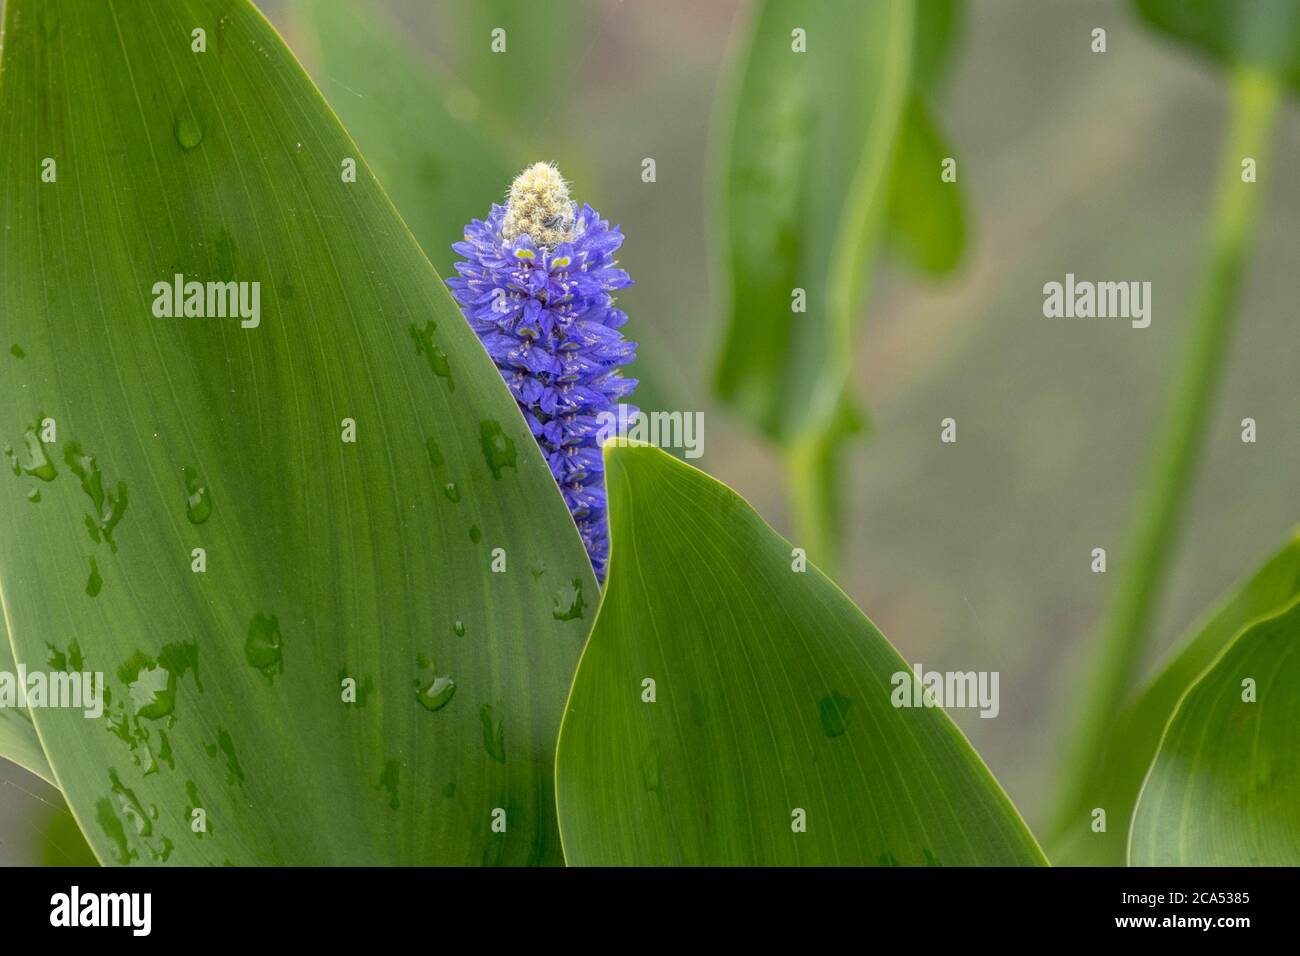 The Pickerel Weed flower gives a special touch in the landscape Stock Photo